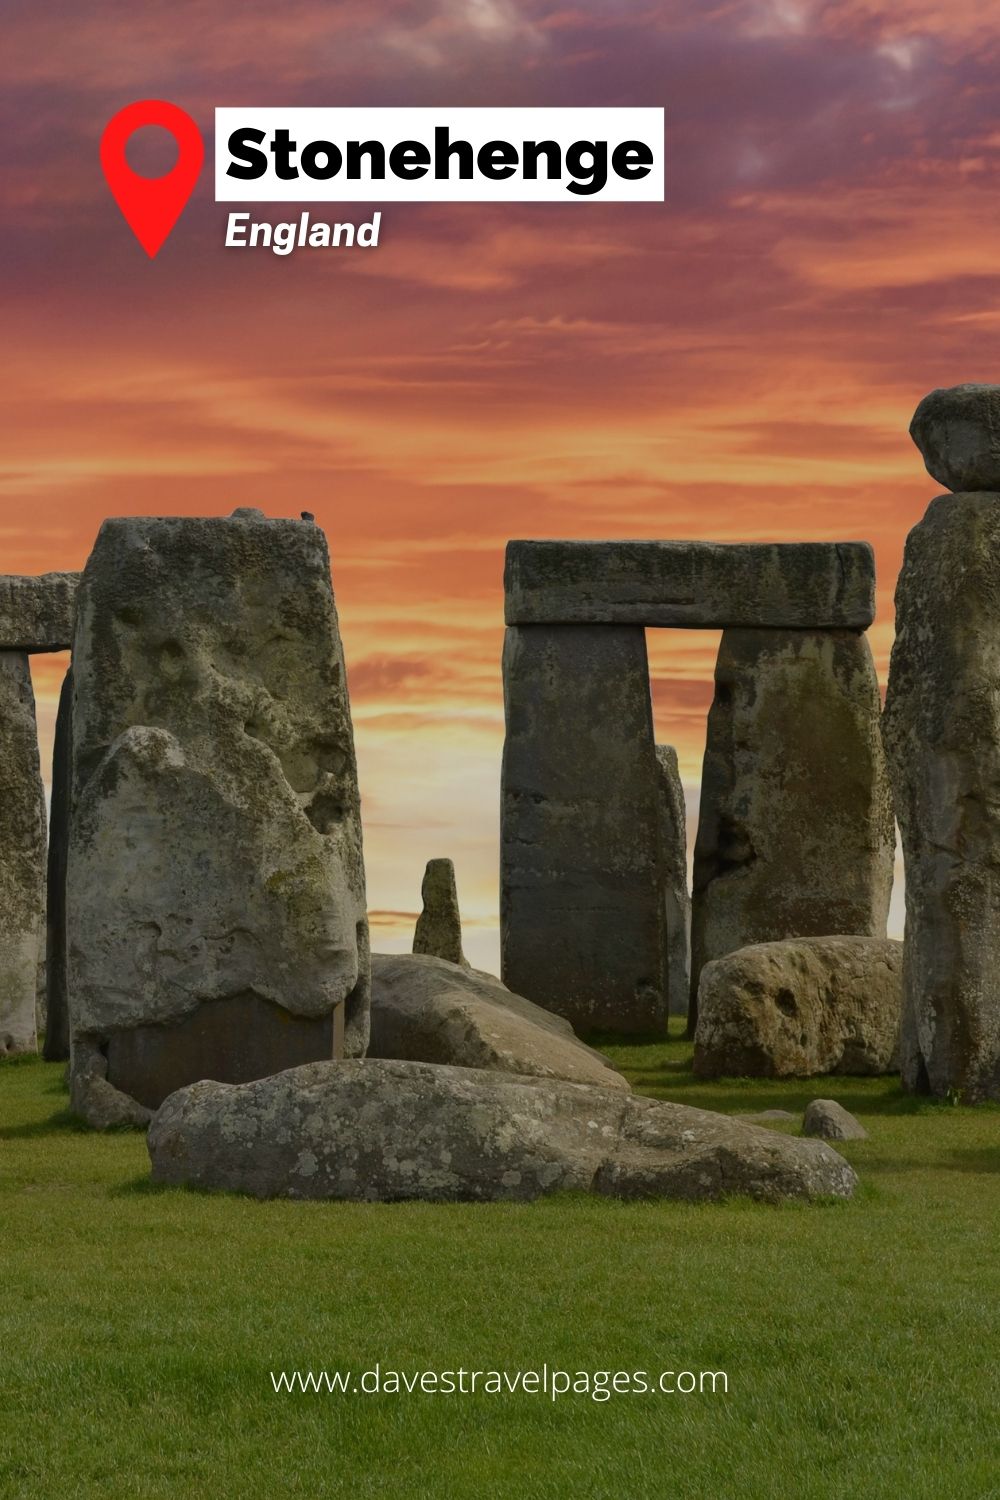 Stonehenge is a must see place in England